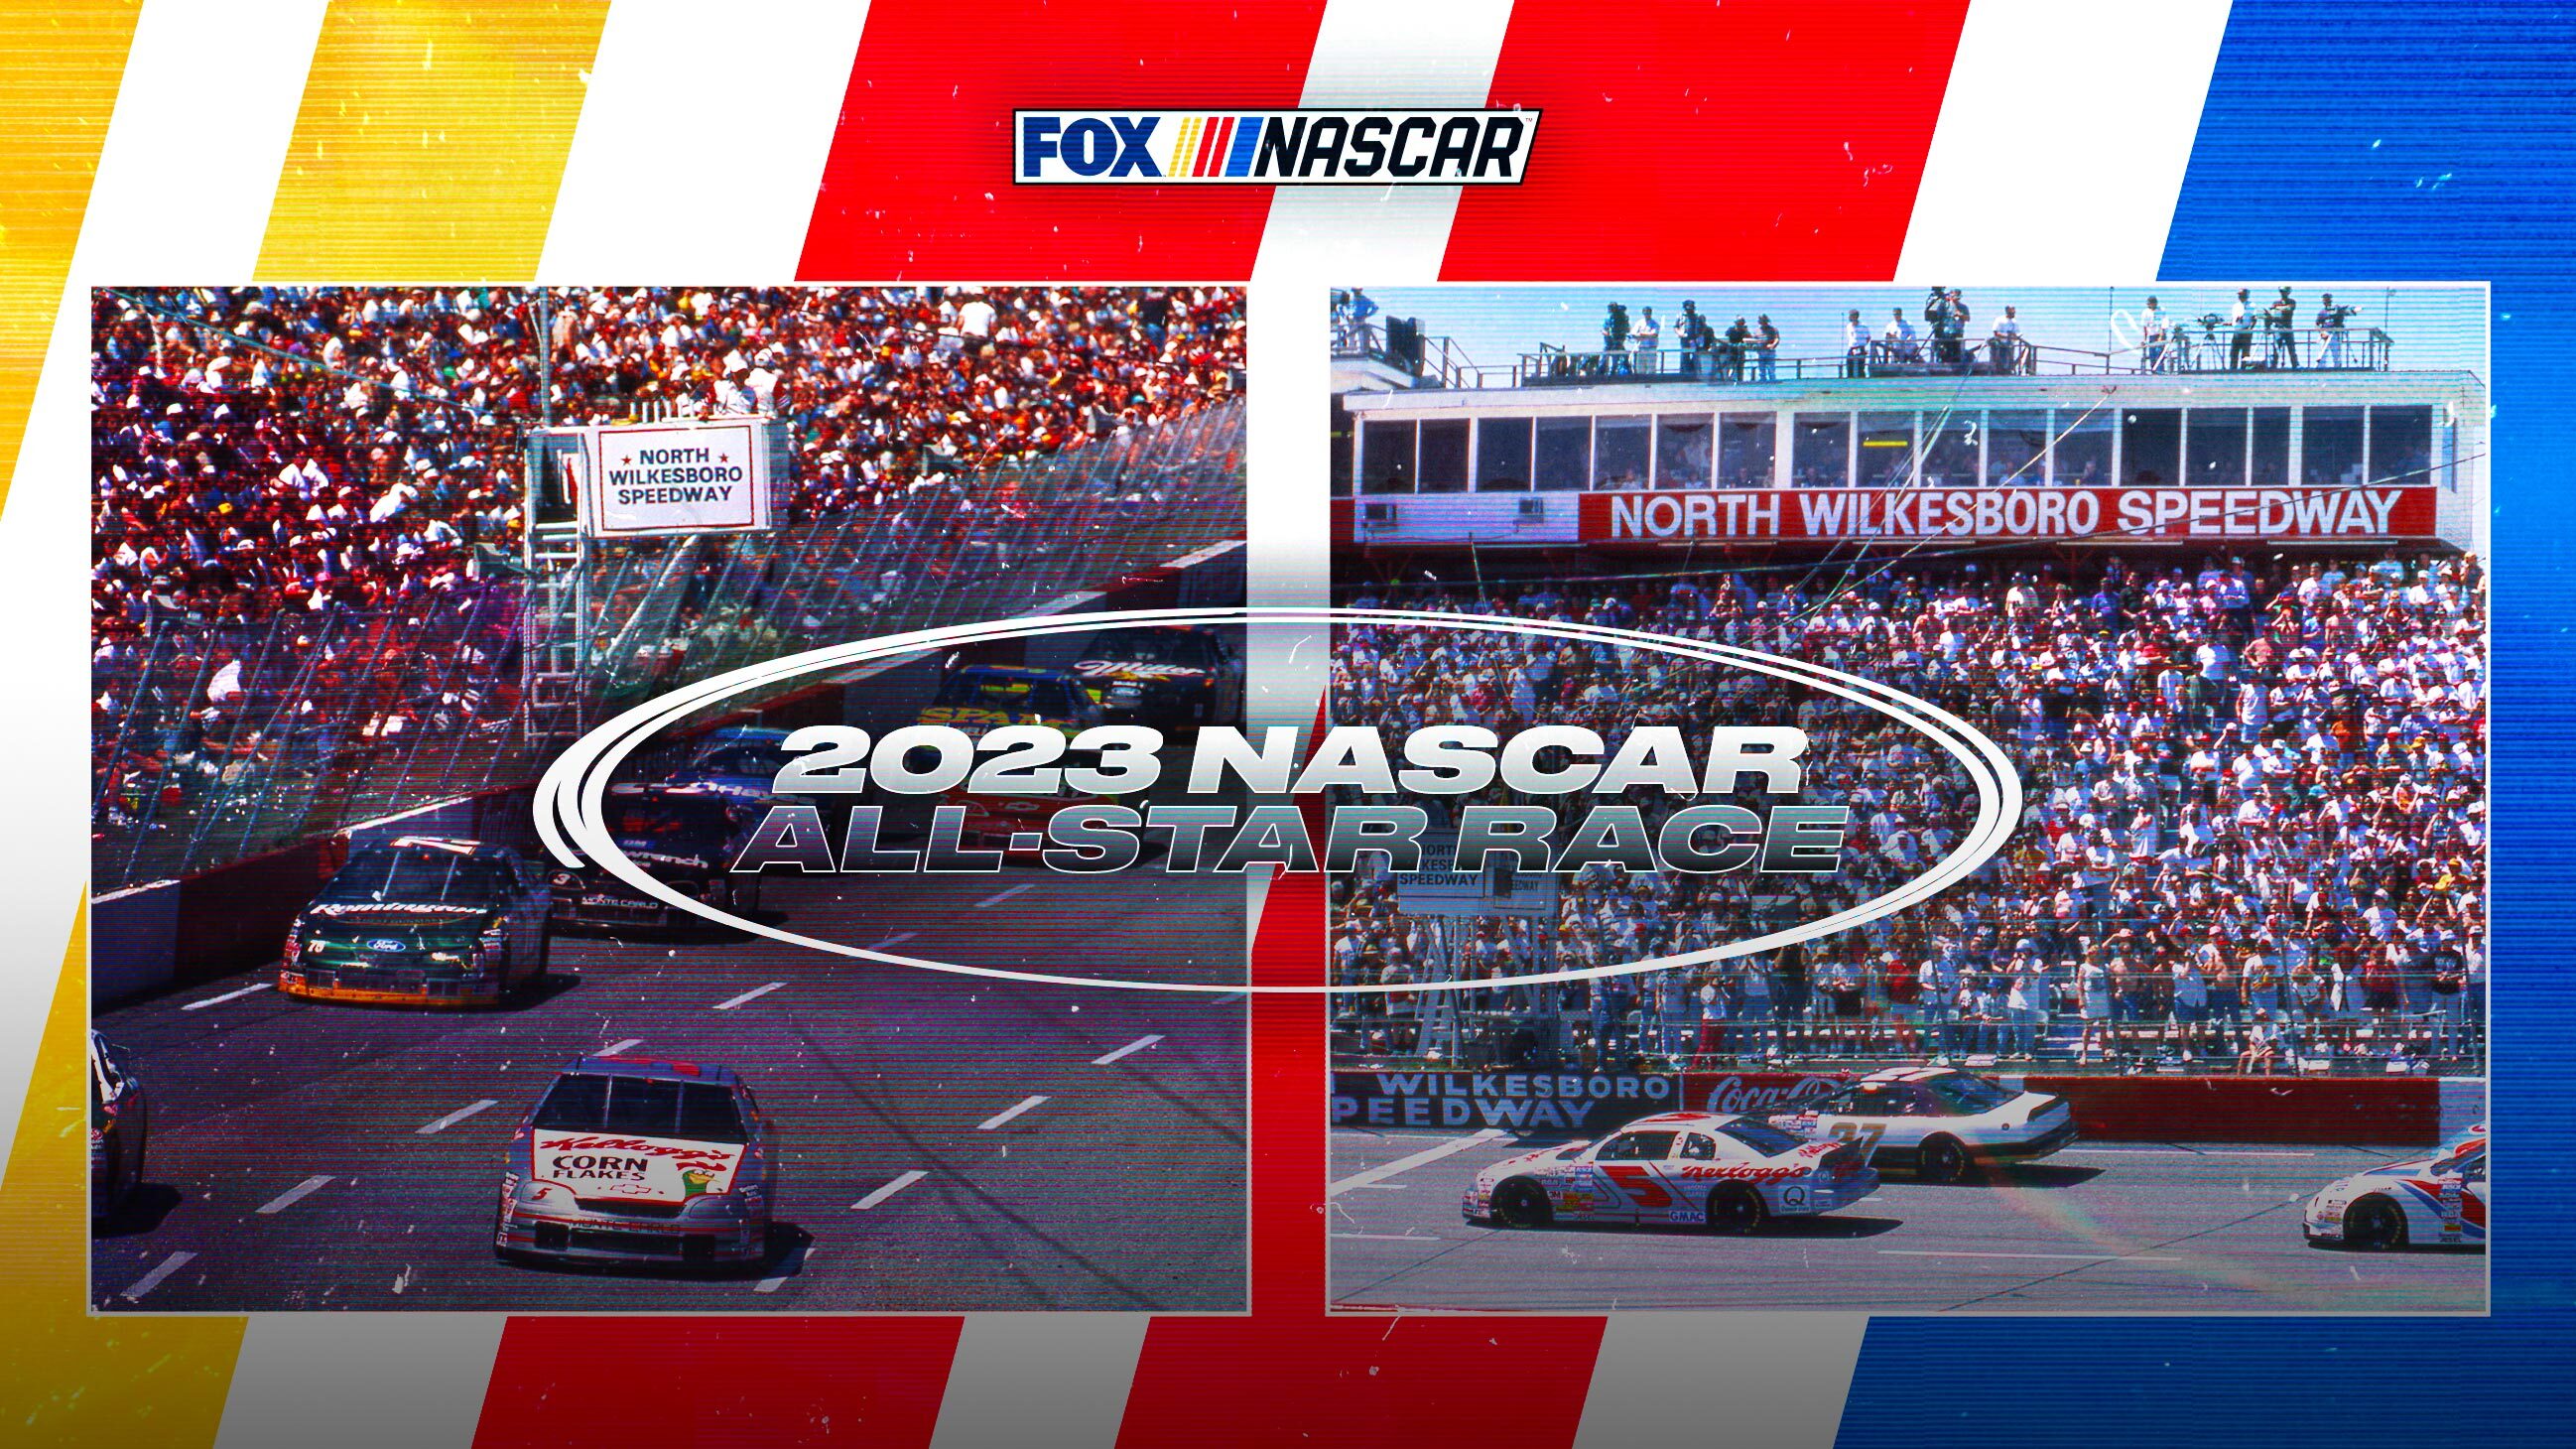 NASCAR set to return to North Wilkesboro Speedway for 2023 All-Star Race